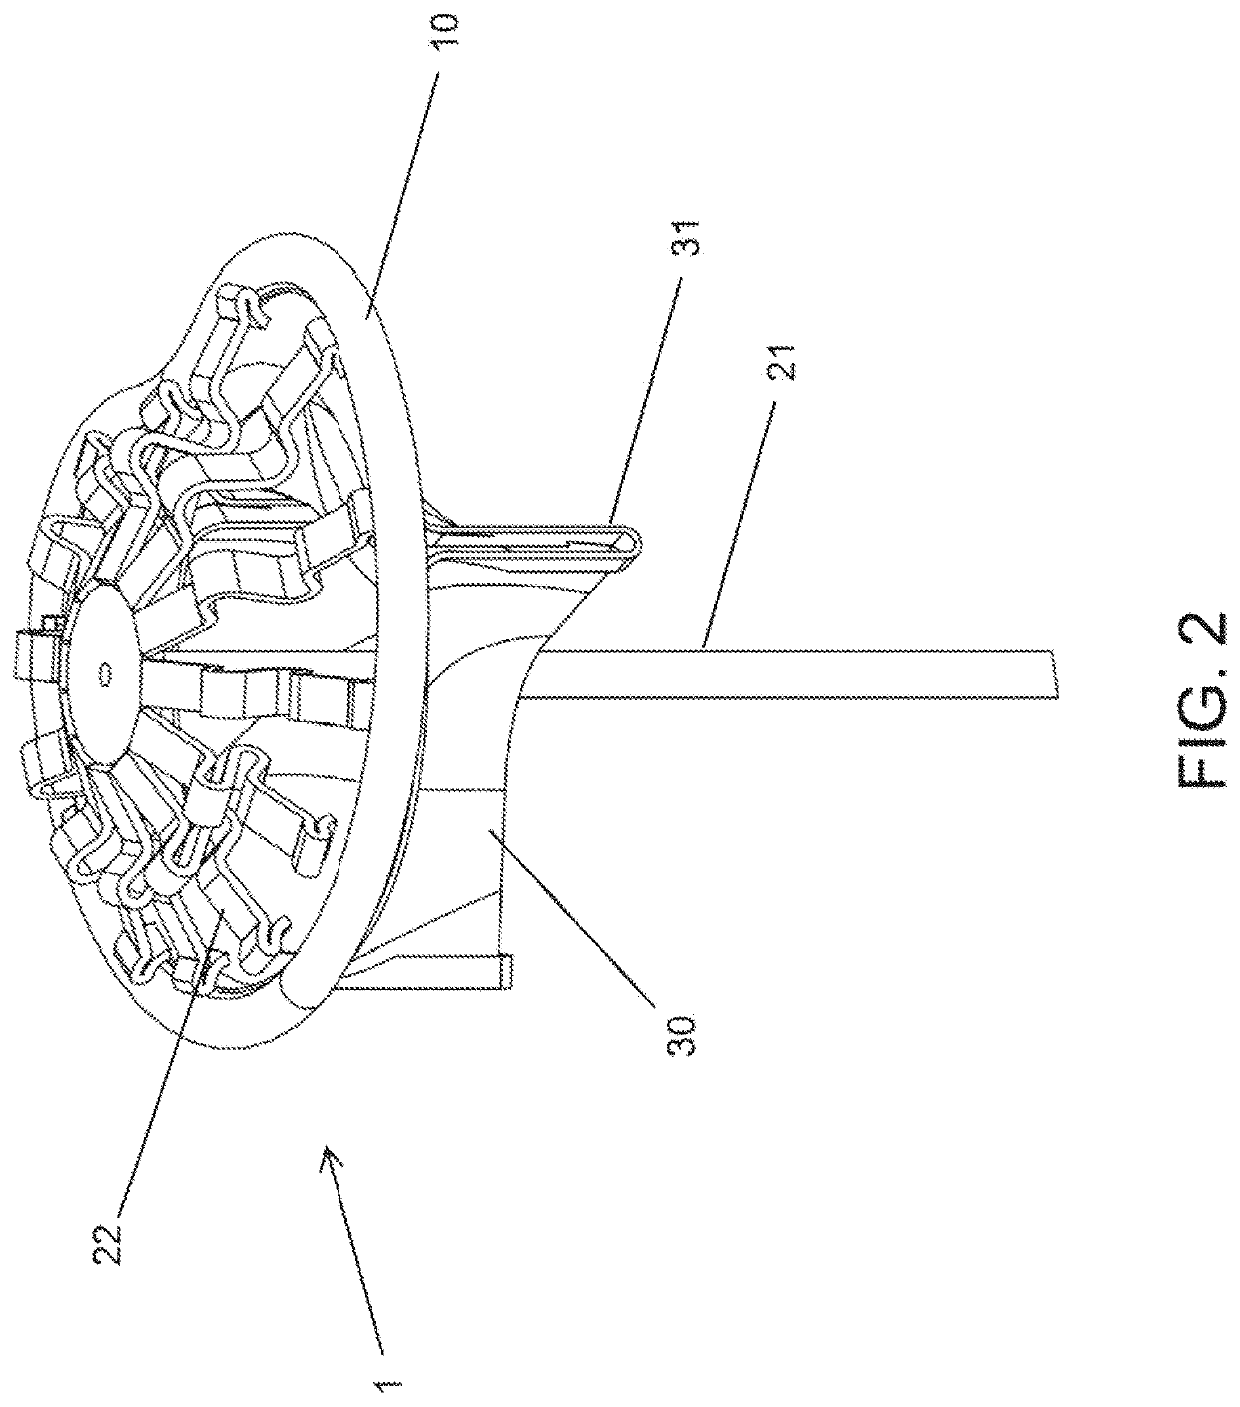 Systems and methods for affixing a prosthesis to tissue